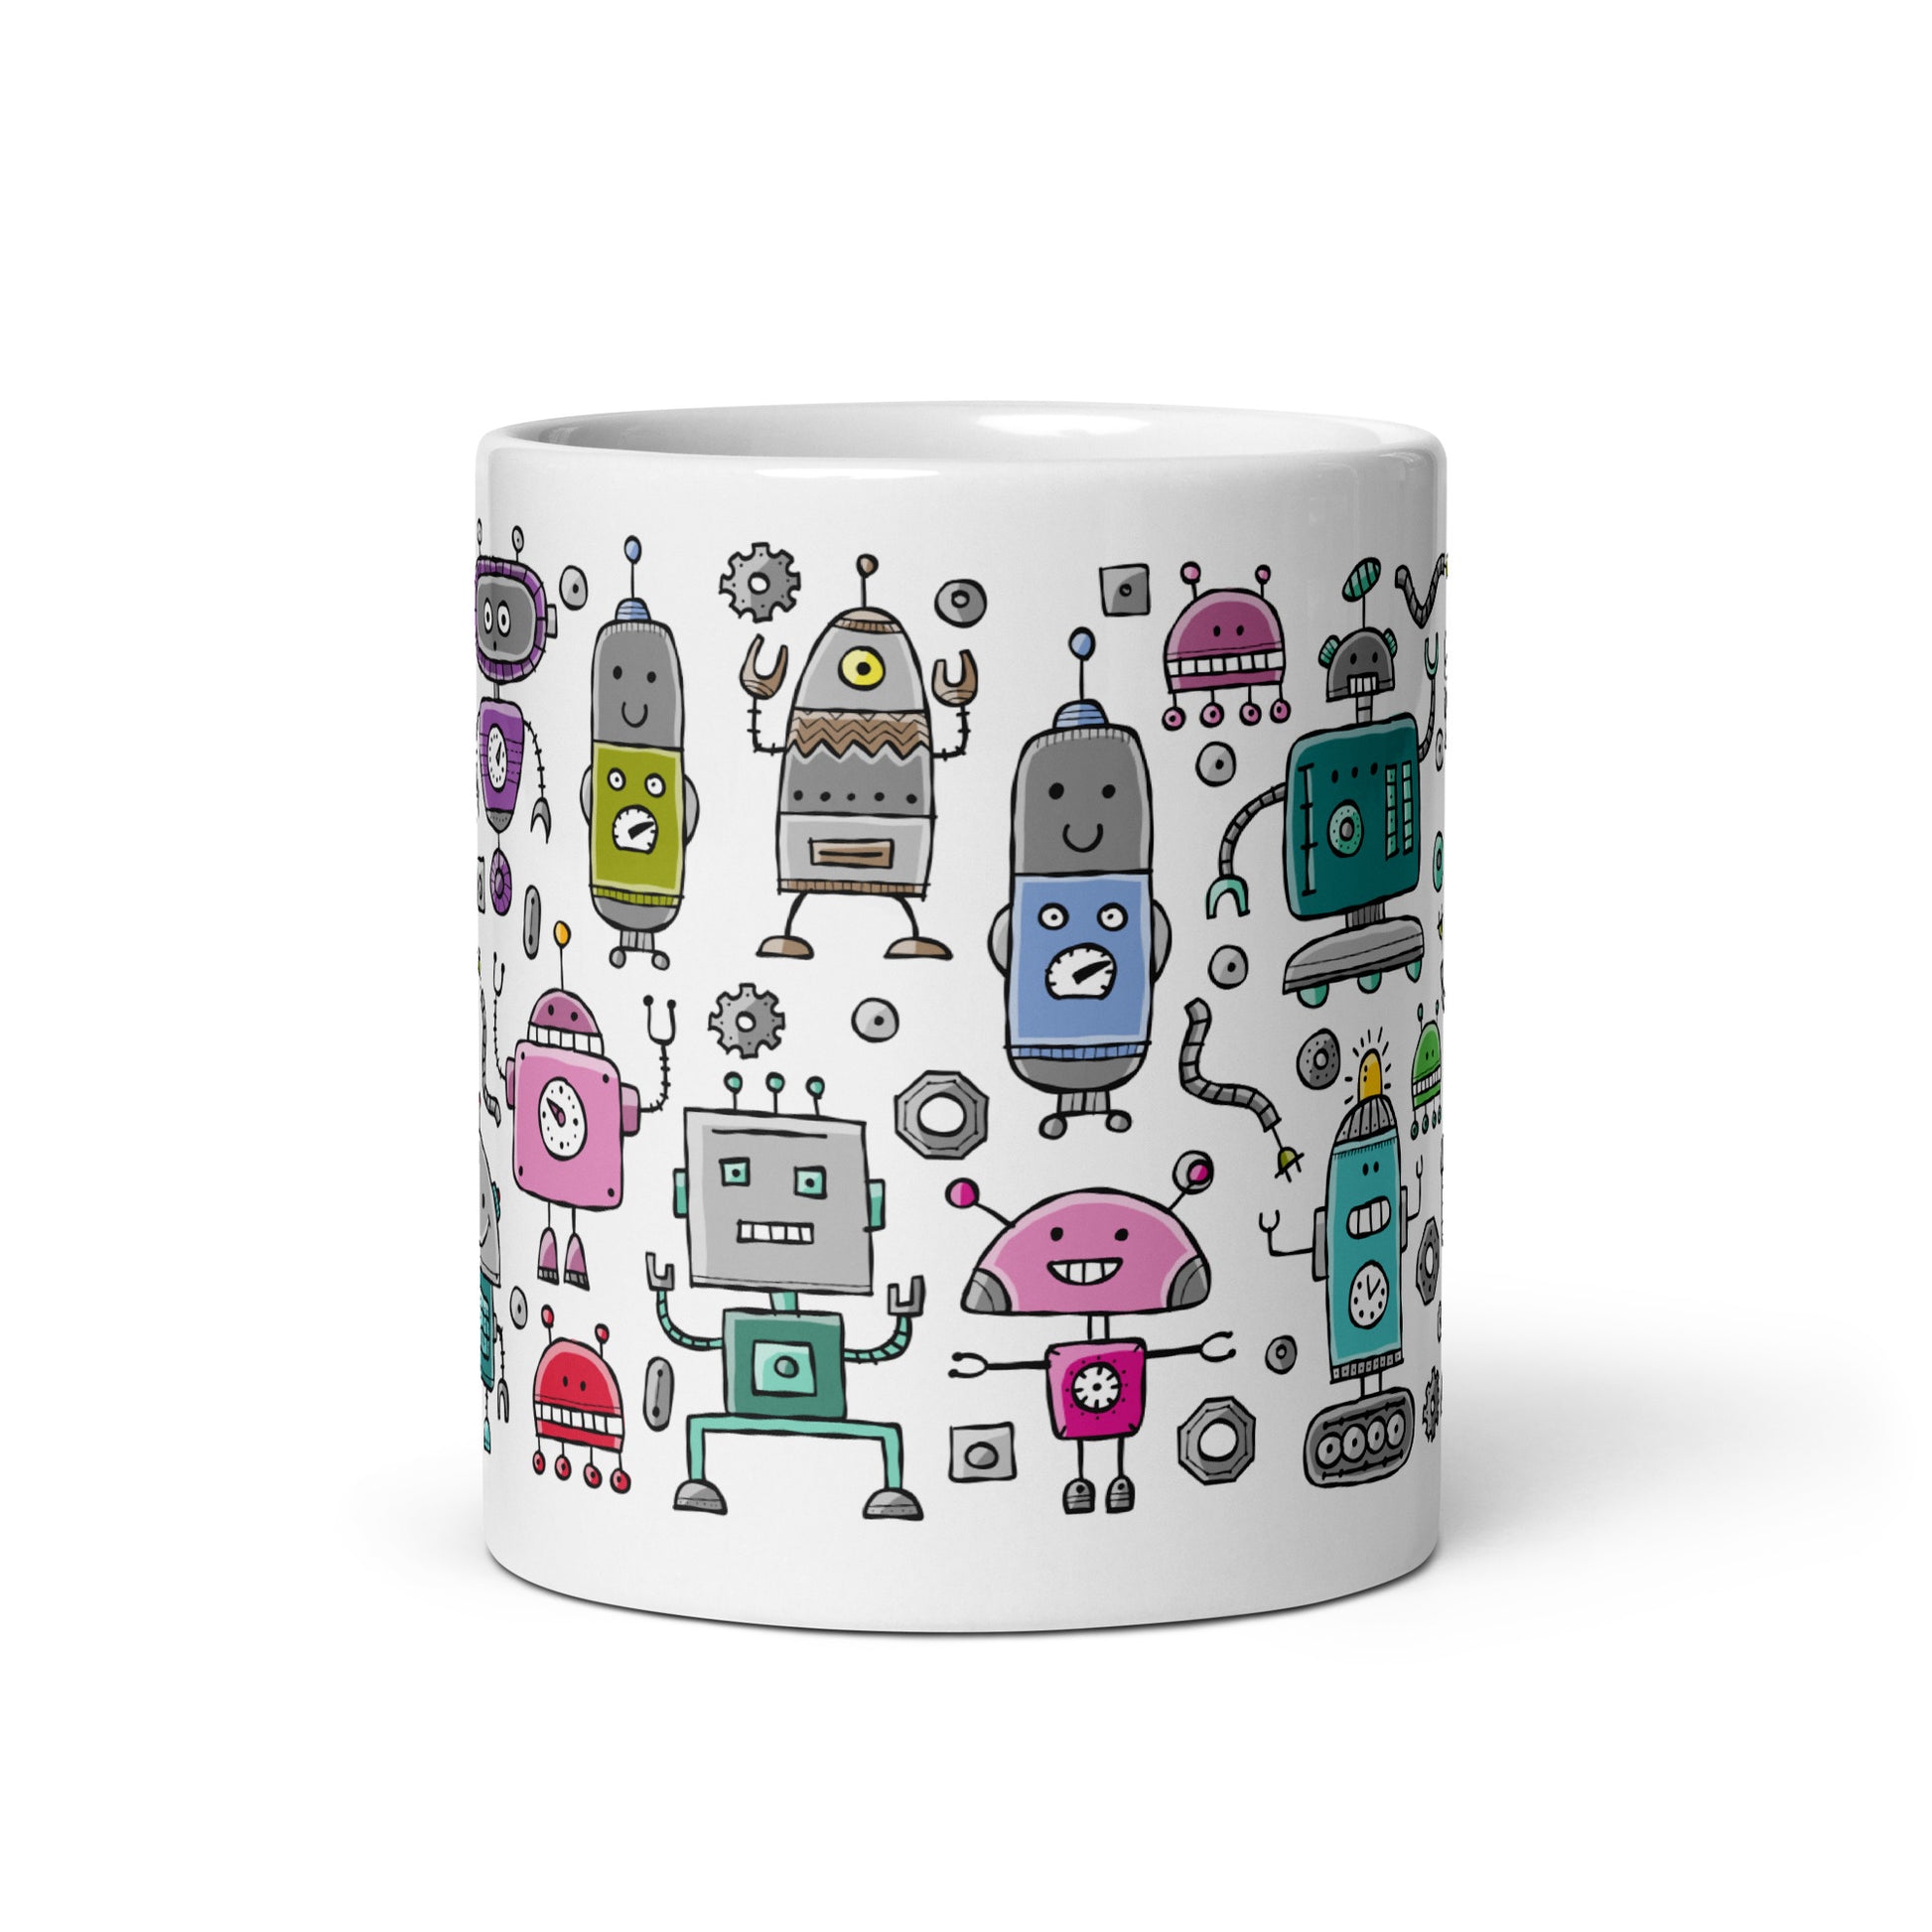 A white ceramic 11oz mug with a collection of colorful and comical robots, perfect for adding joy and laughter to your morning routine